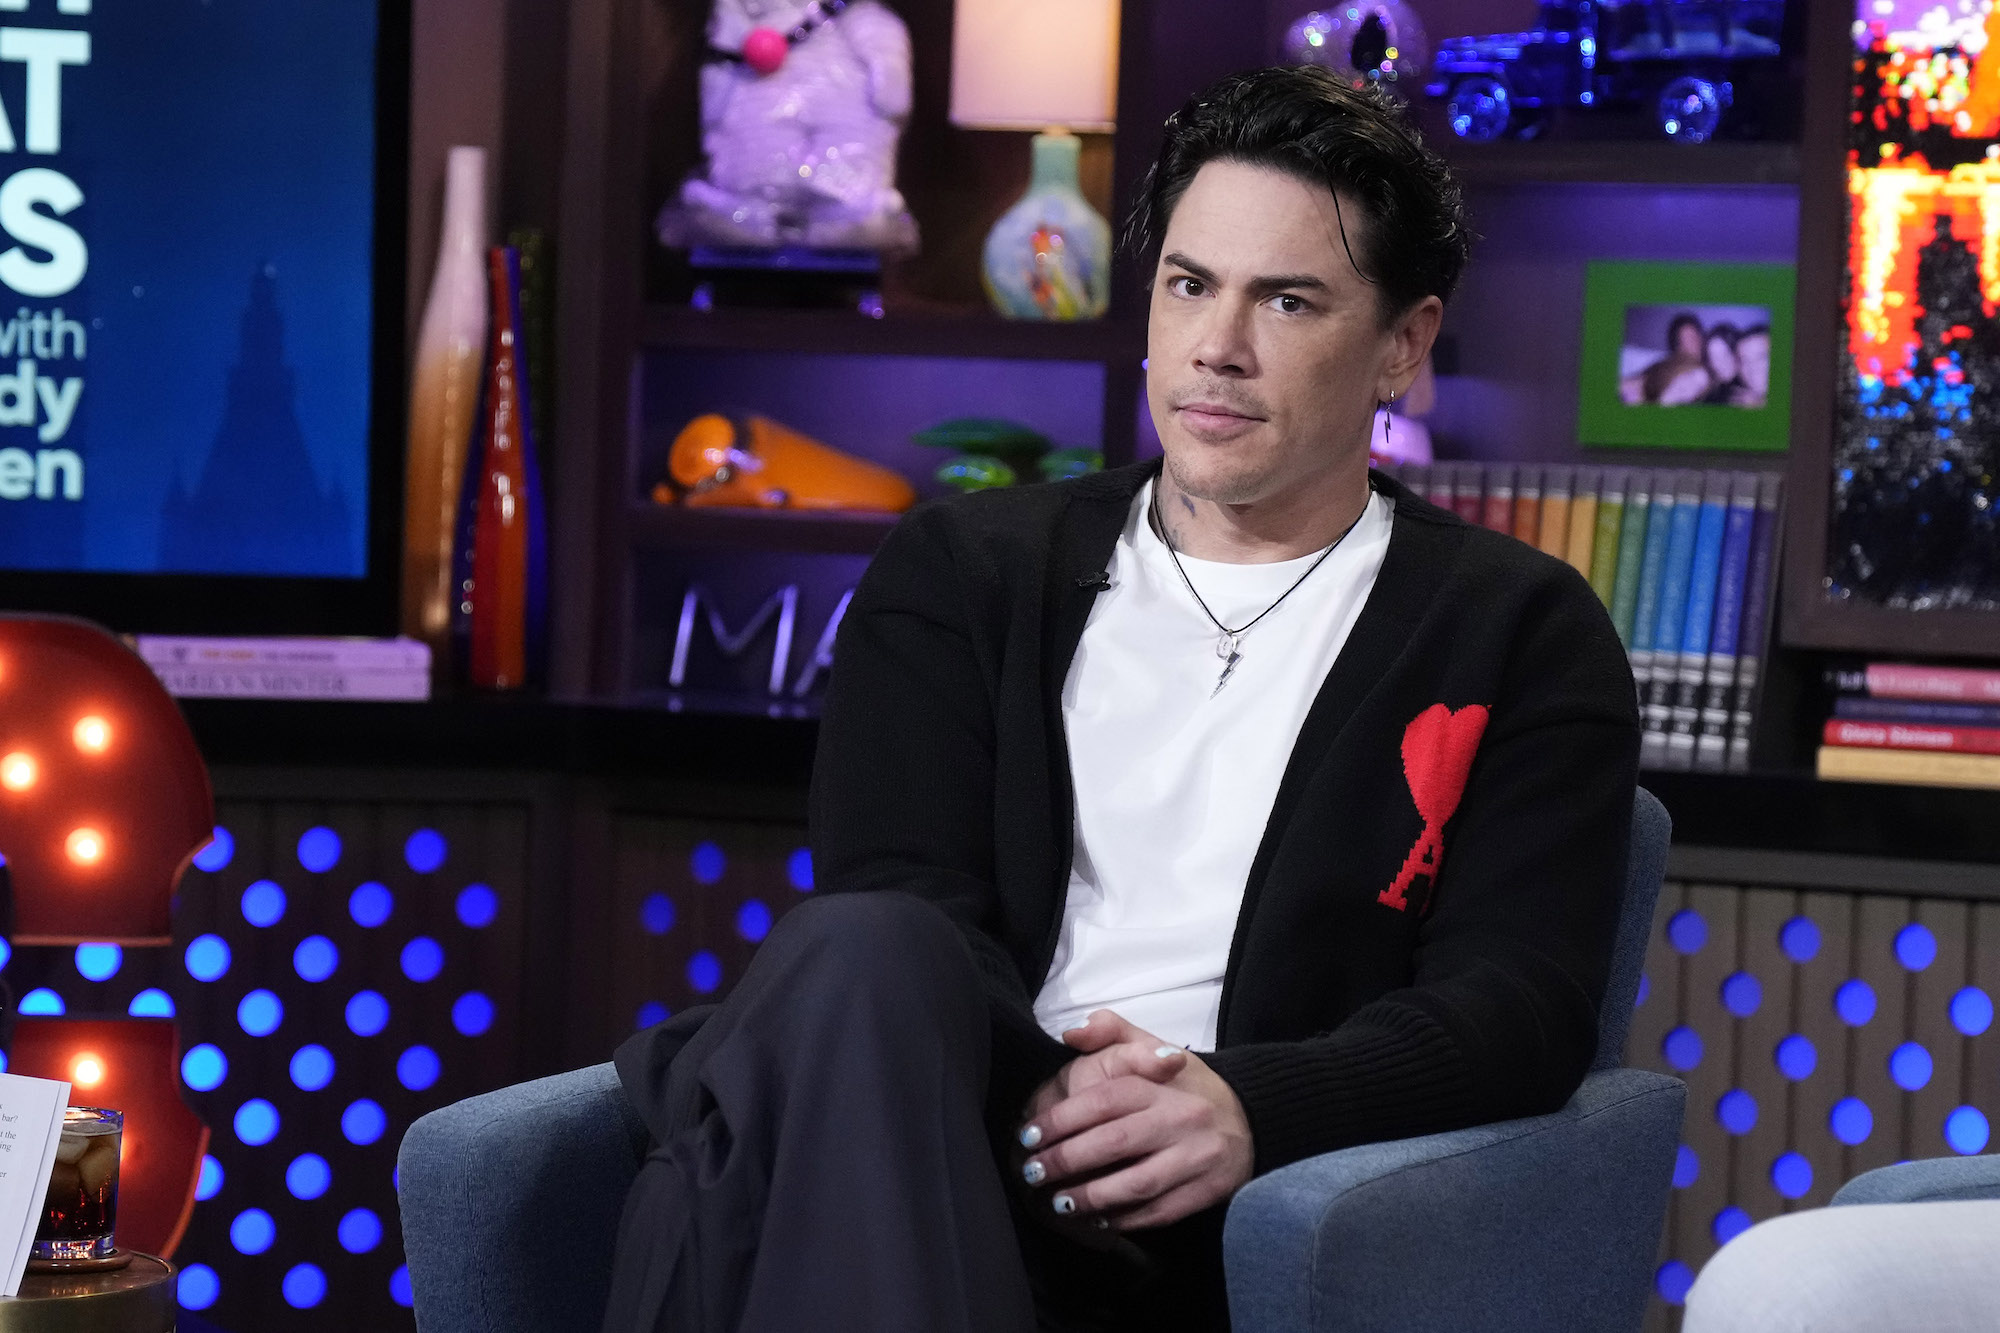 VPR Season 11 Reunion Part 1 Revs Tom Sandoval Slams Grooming Claims George Floyd Comments and More